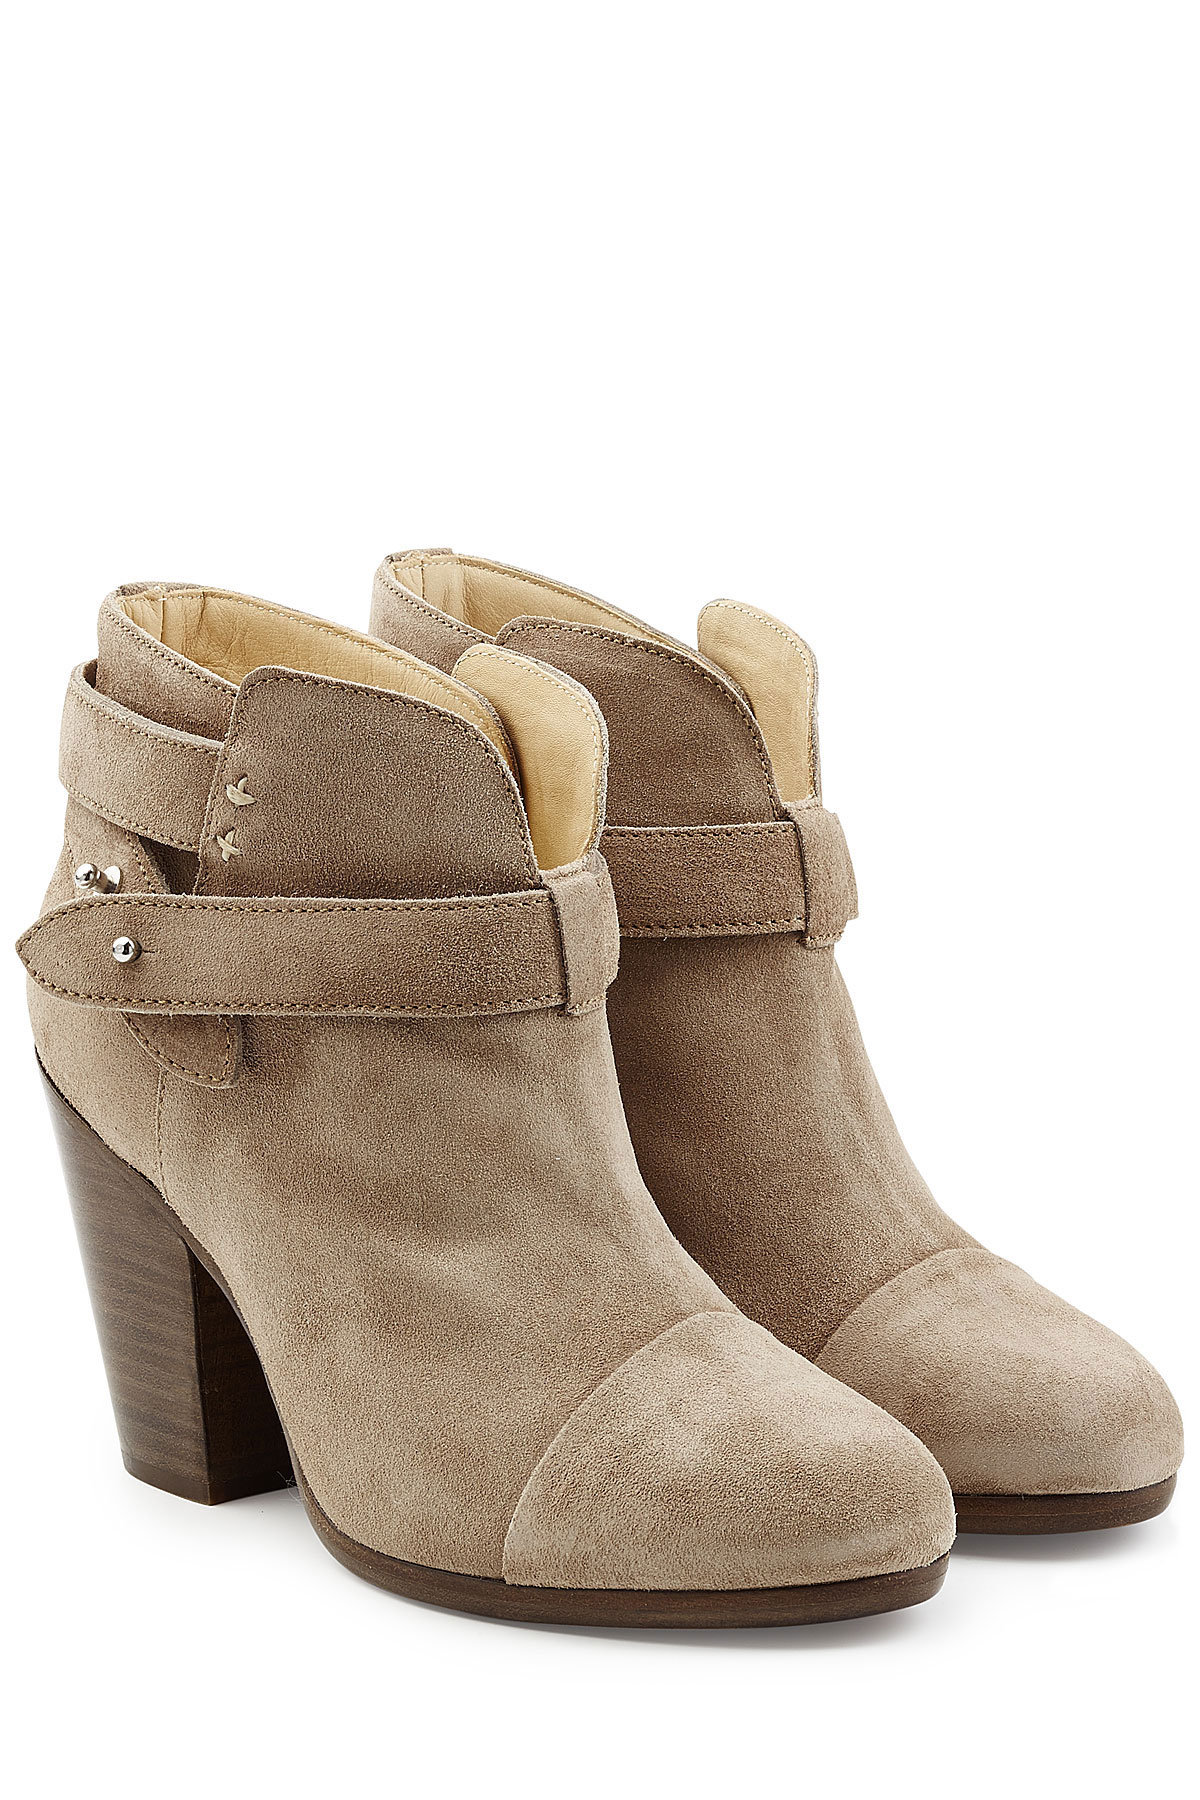 Suede Harrow Ankle Boots by Rag & Bone